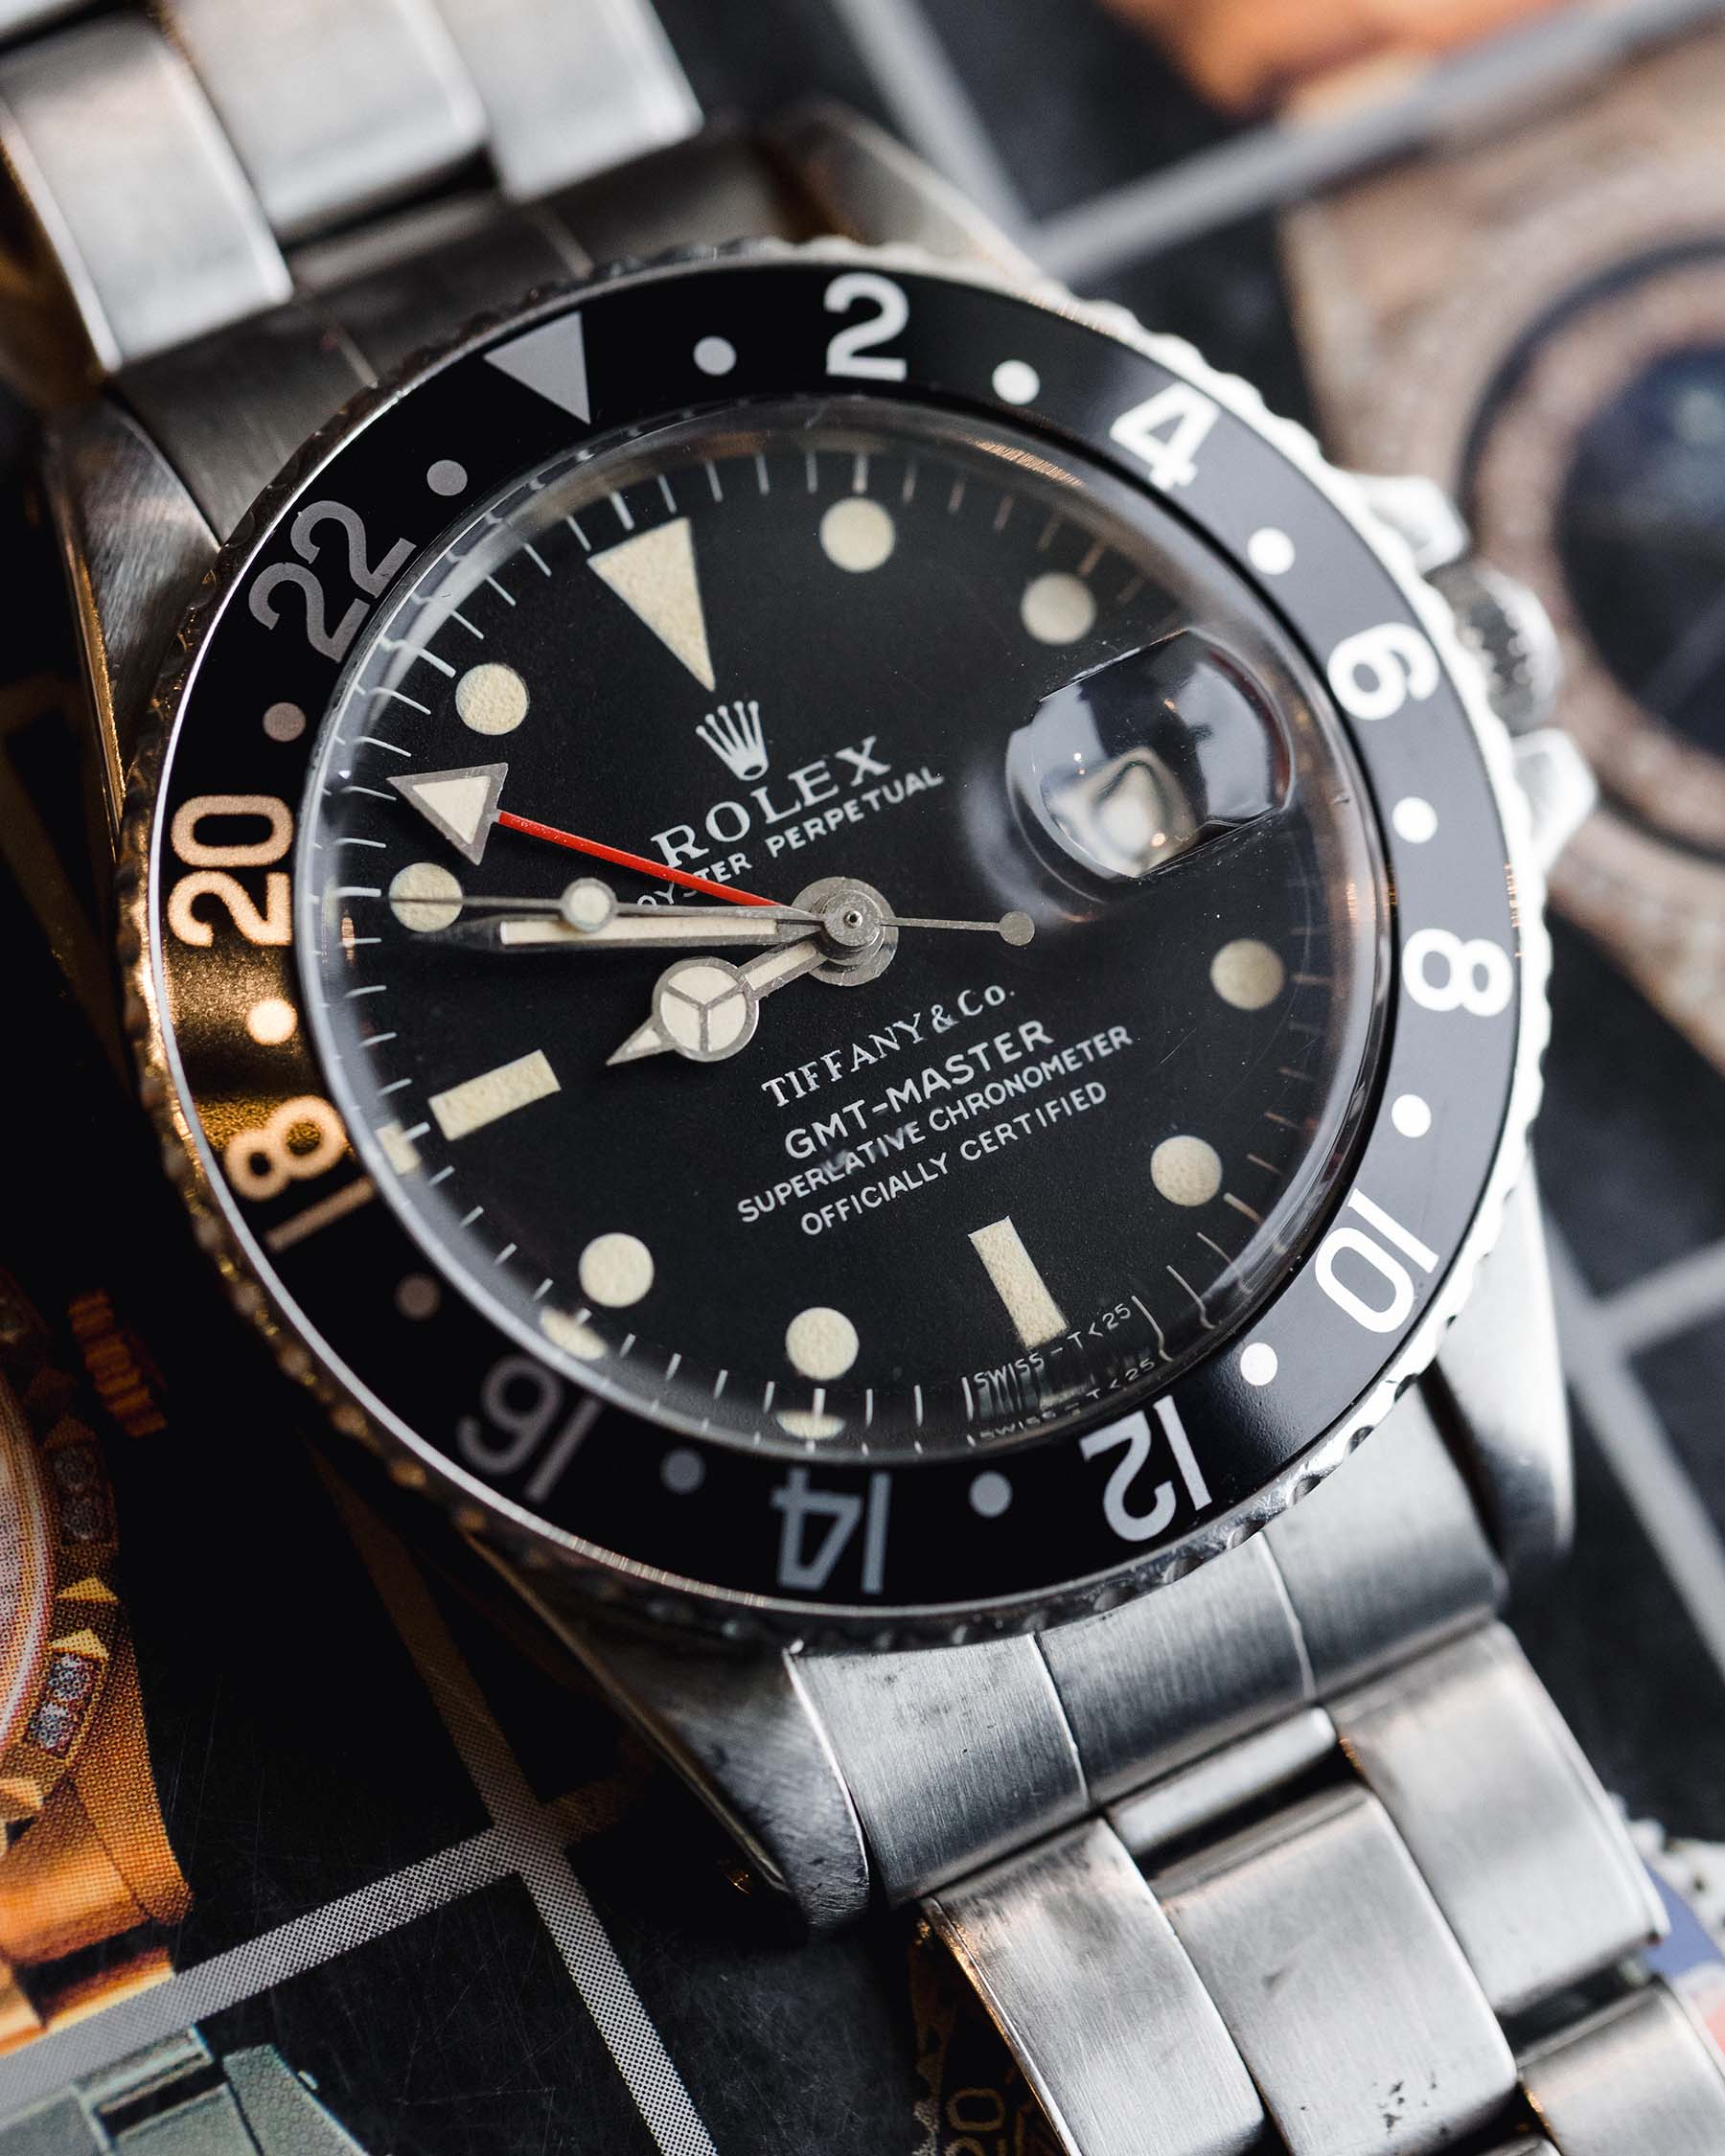 Rolex - A very special Rolex GMT MASTER 1675 auctioned yesterday